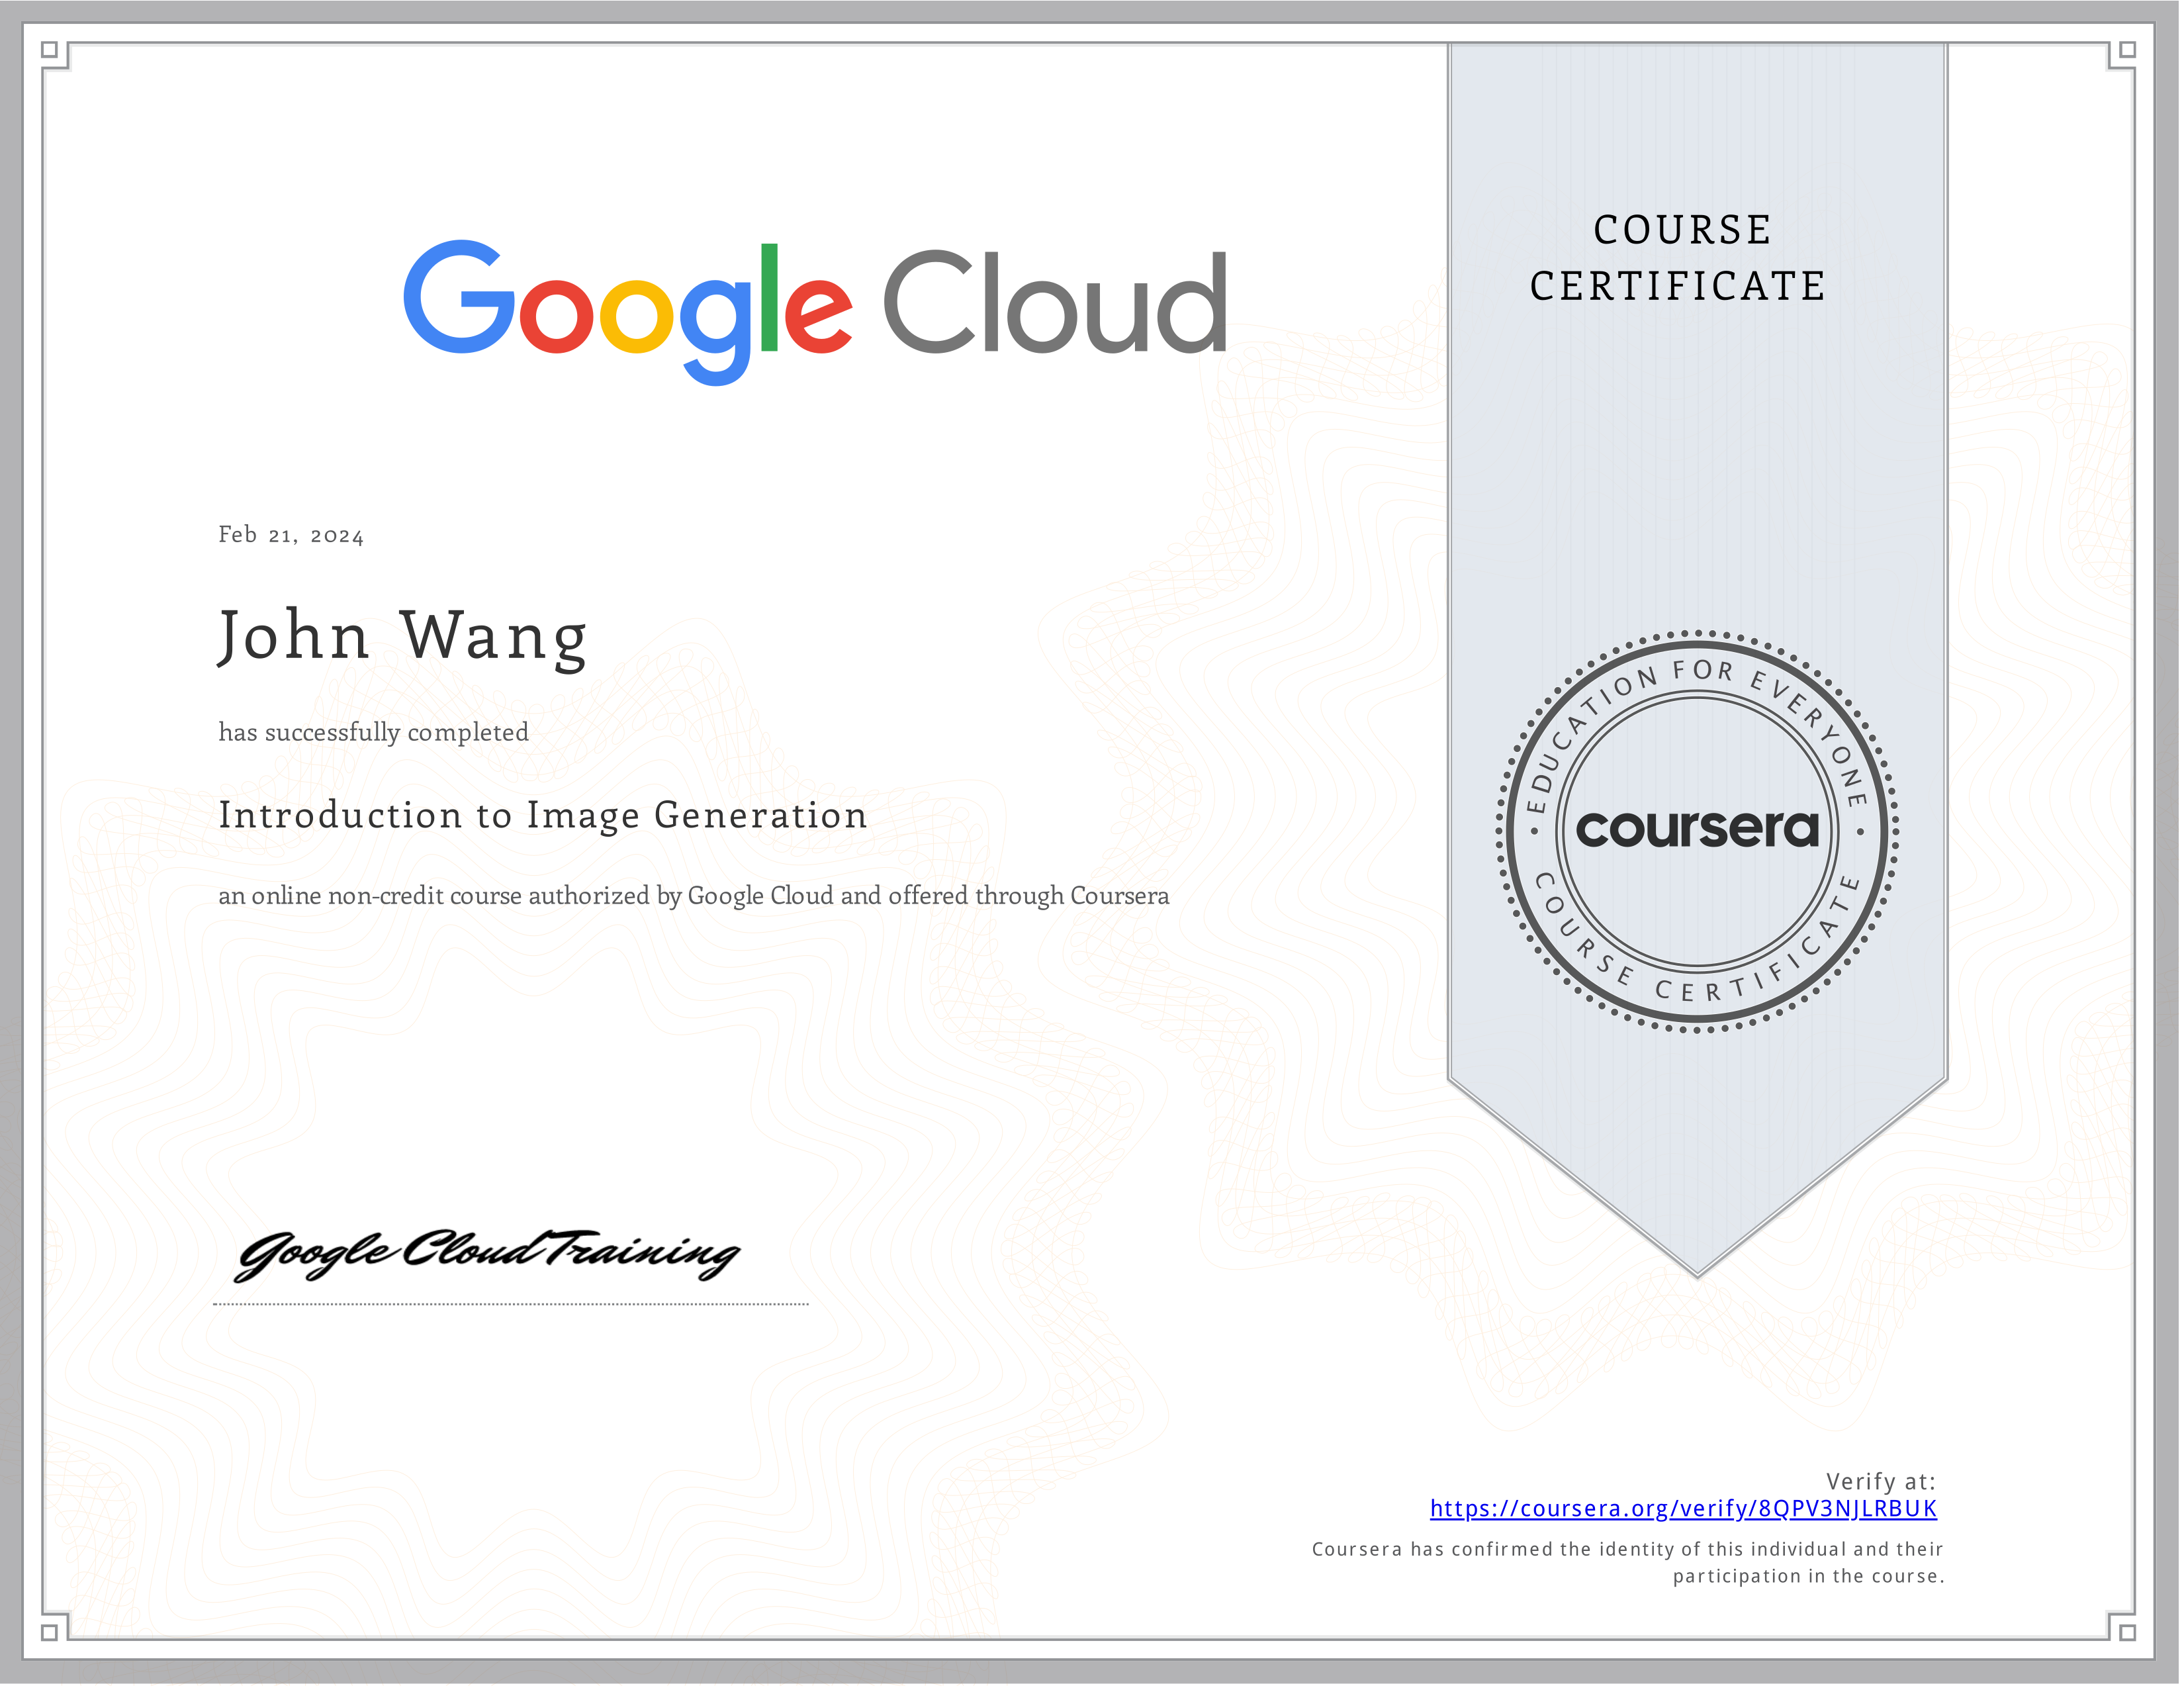 John's Introduction to Image Generation from Google Cloud